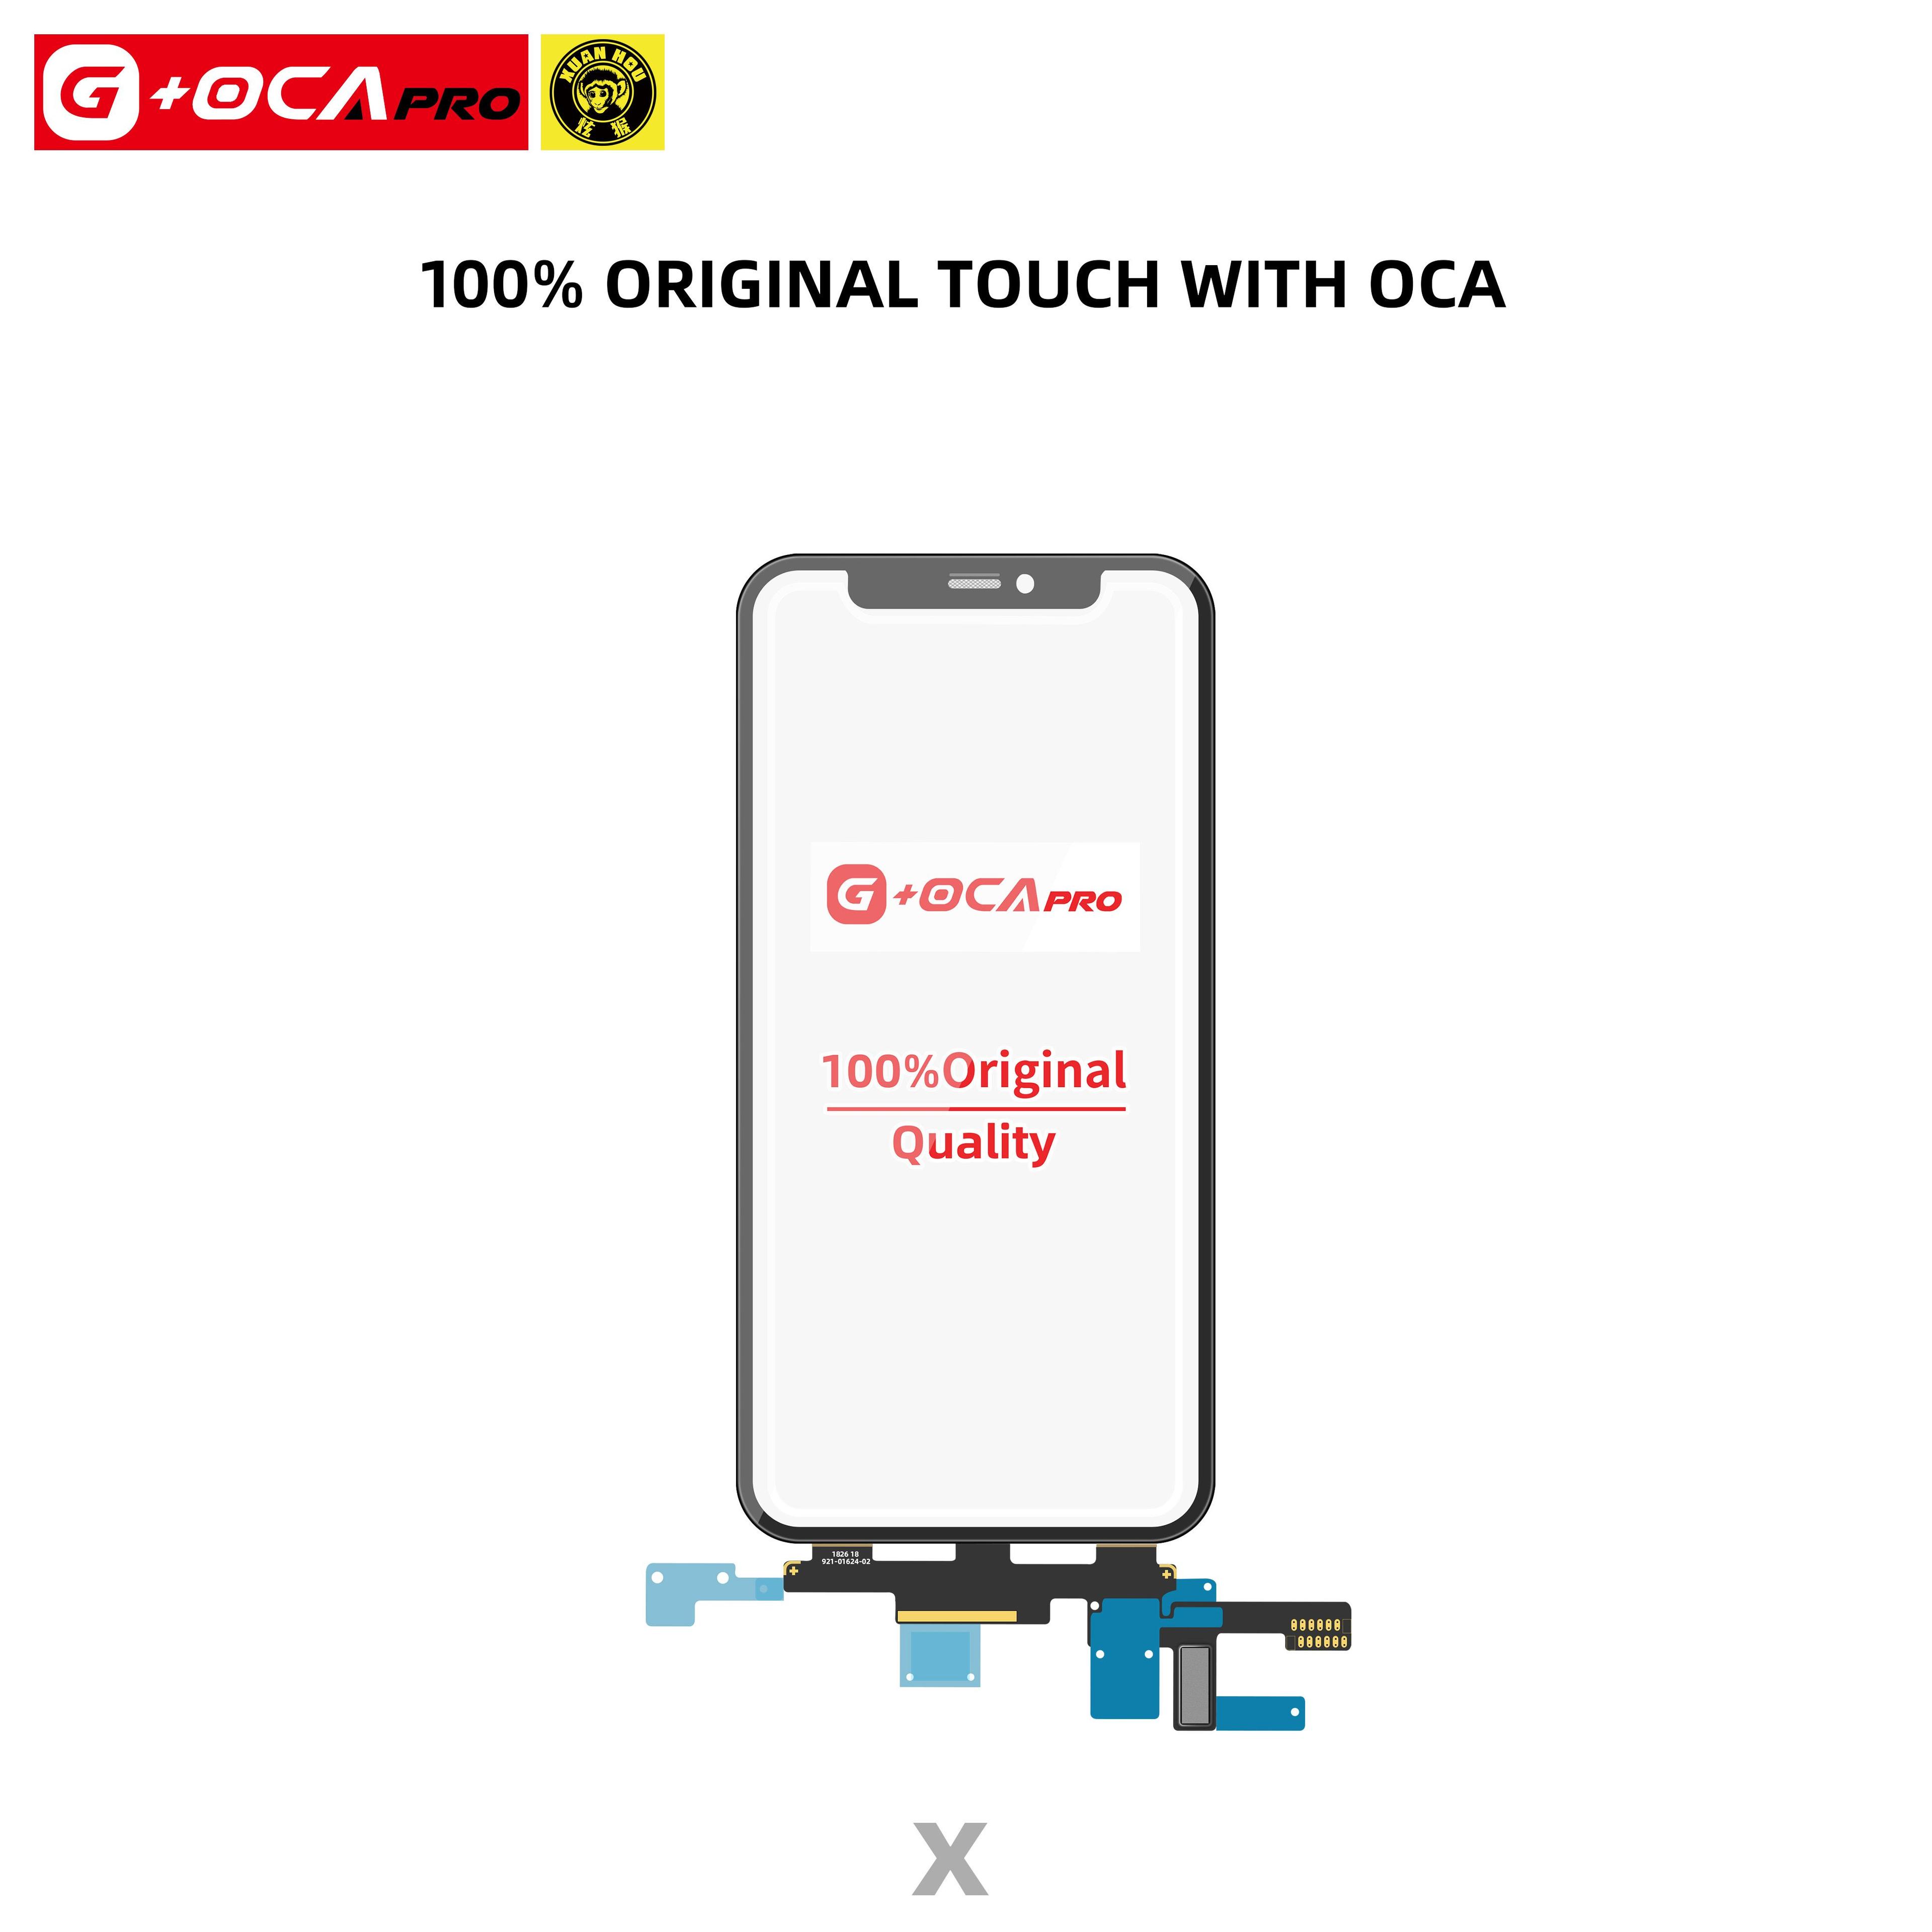 Touch Screen G + OCA Pro with original touch (with oleophobic cover) iPhone X